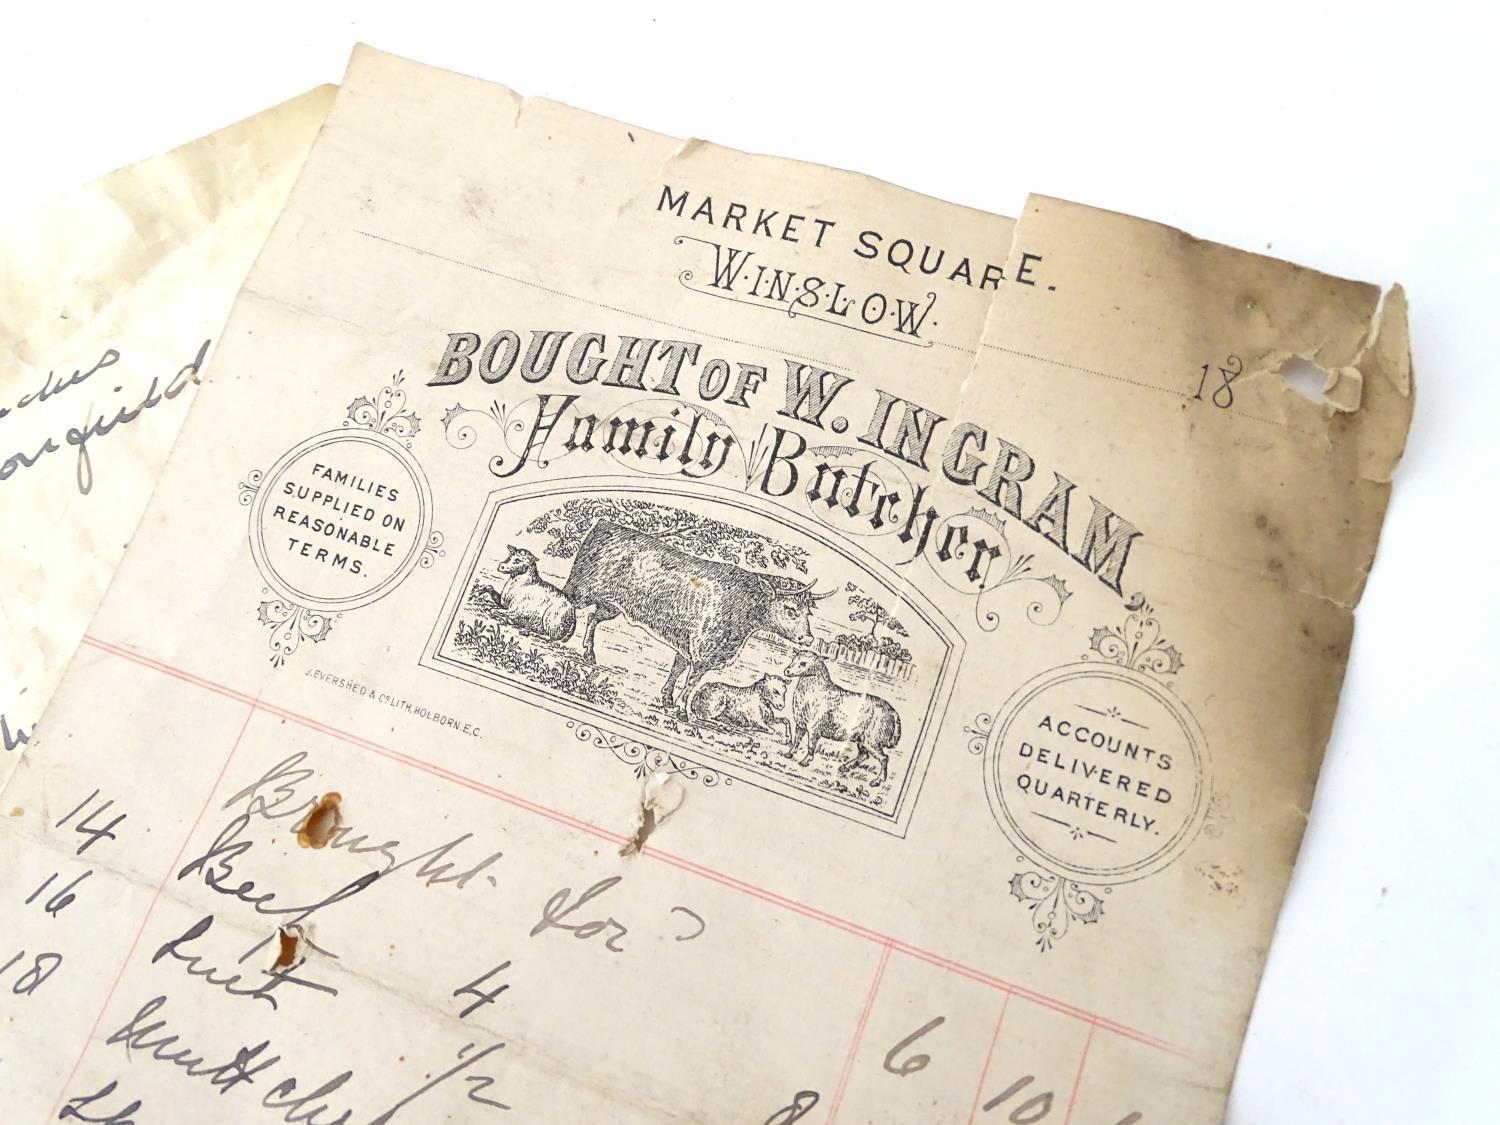 Local Ephemera : Bill heads including - ' Bought of W Ingram Family Butcher Market Square - Image 3 of 4